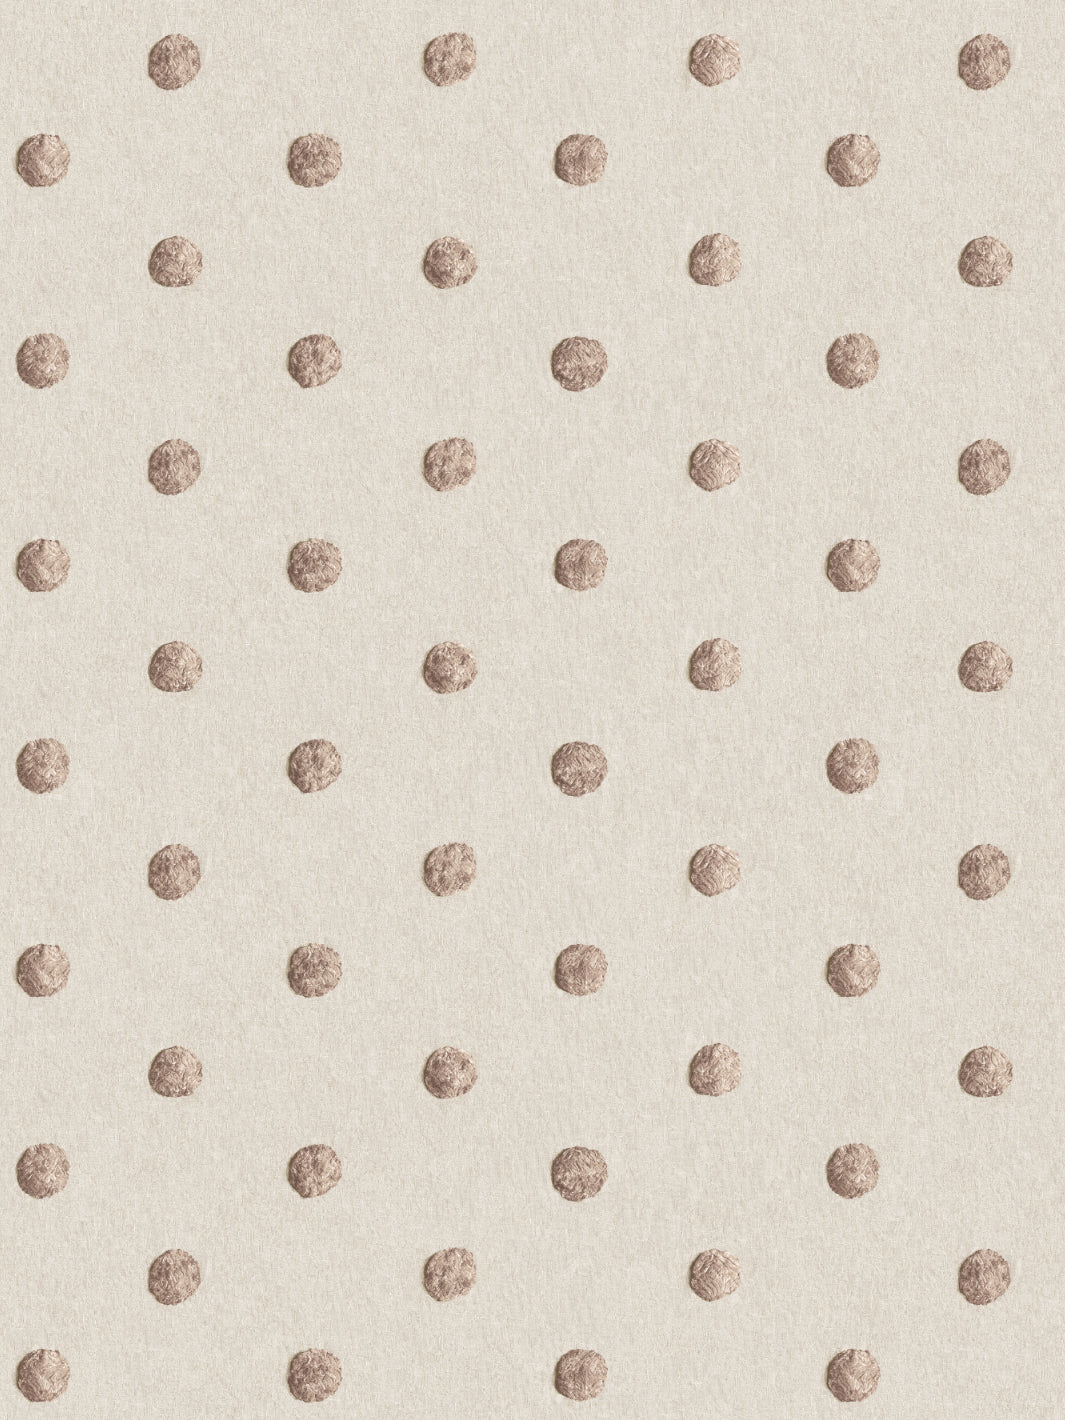 'Chenille Dots Small' Wallpaper by Chris Benz - Latte